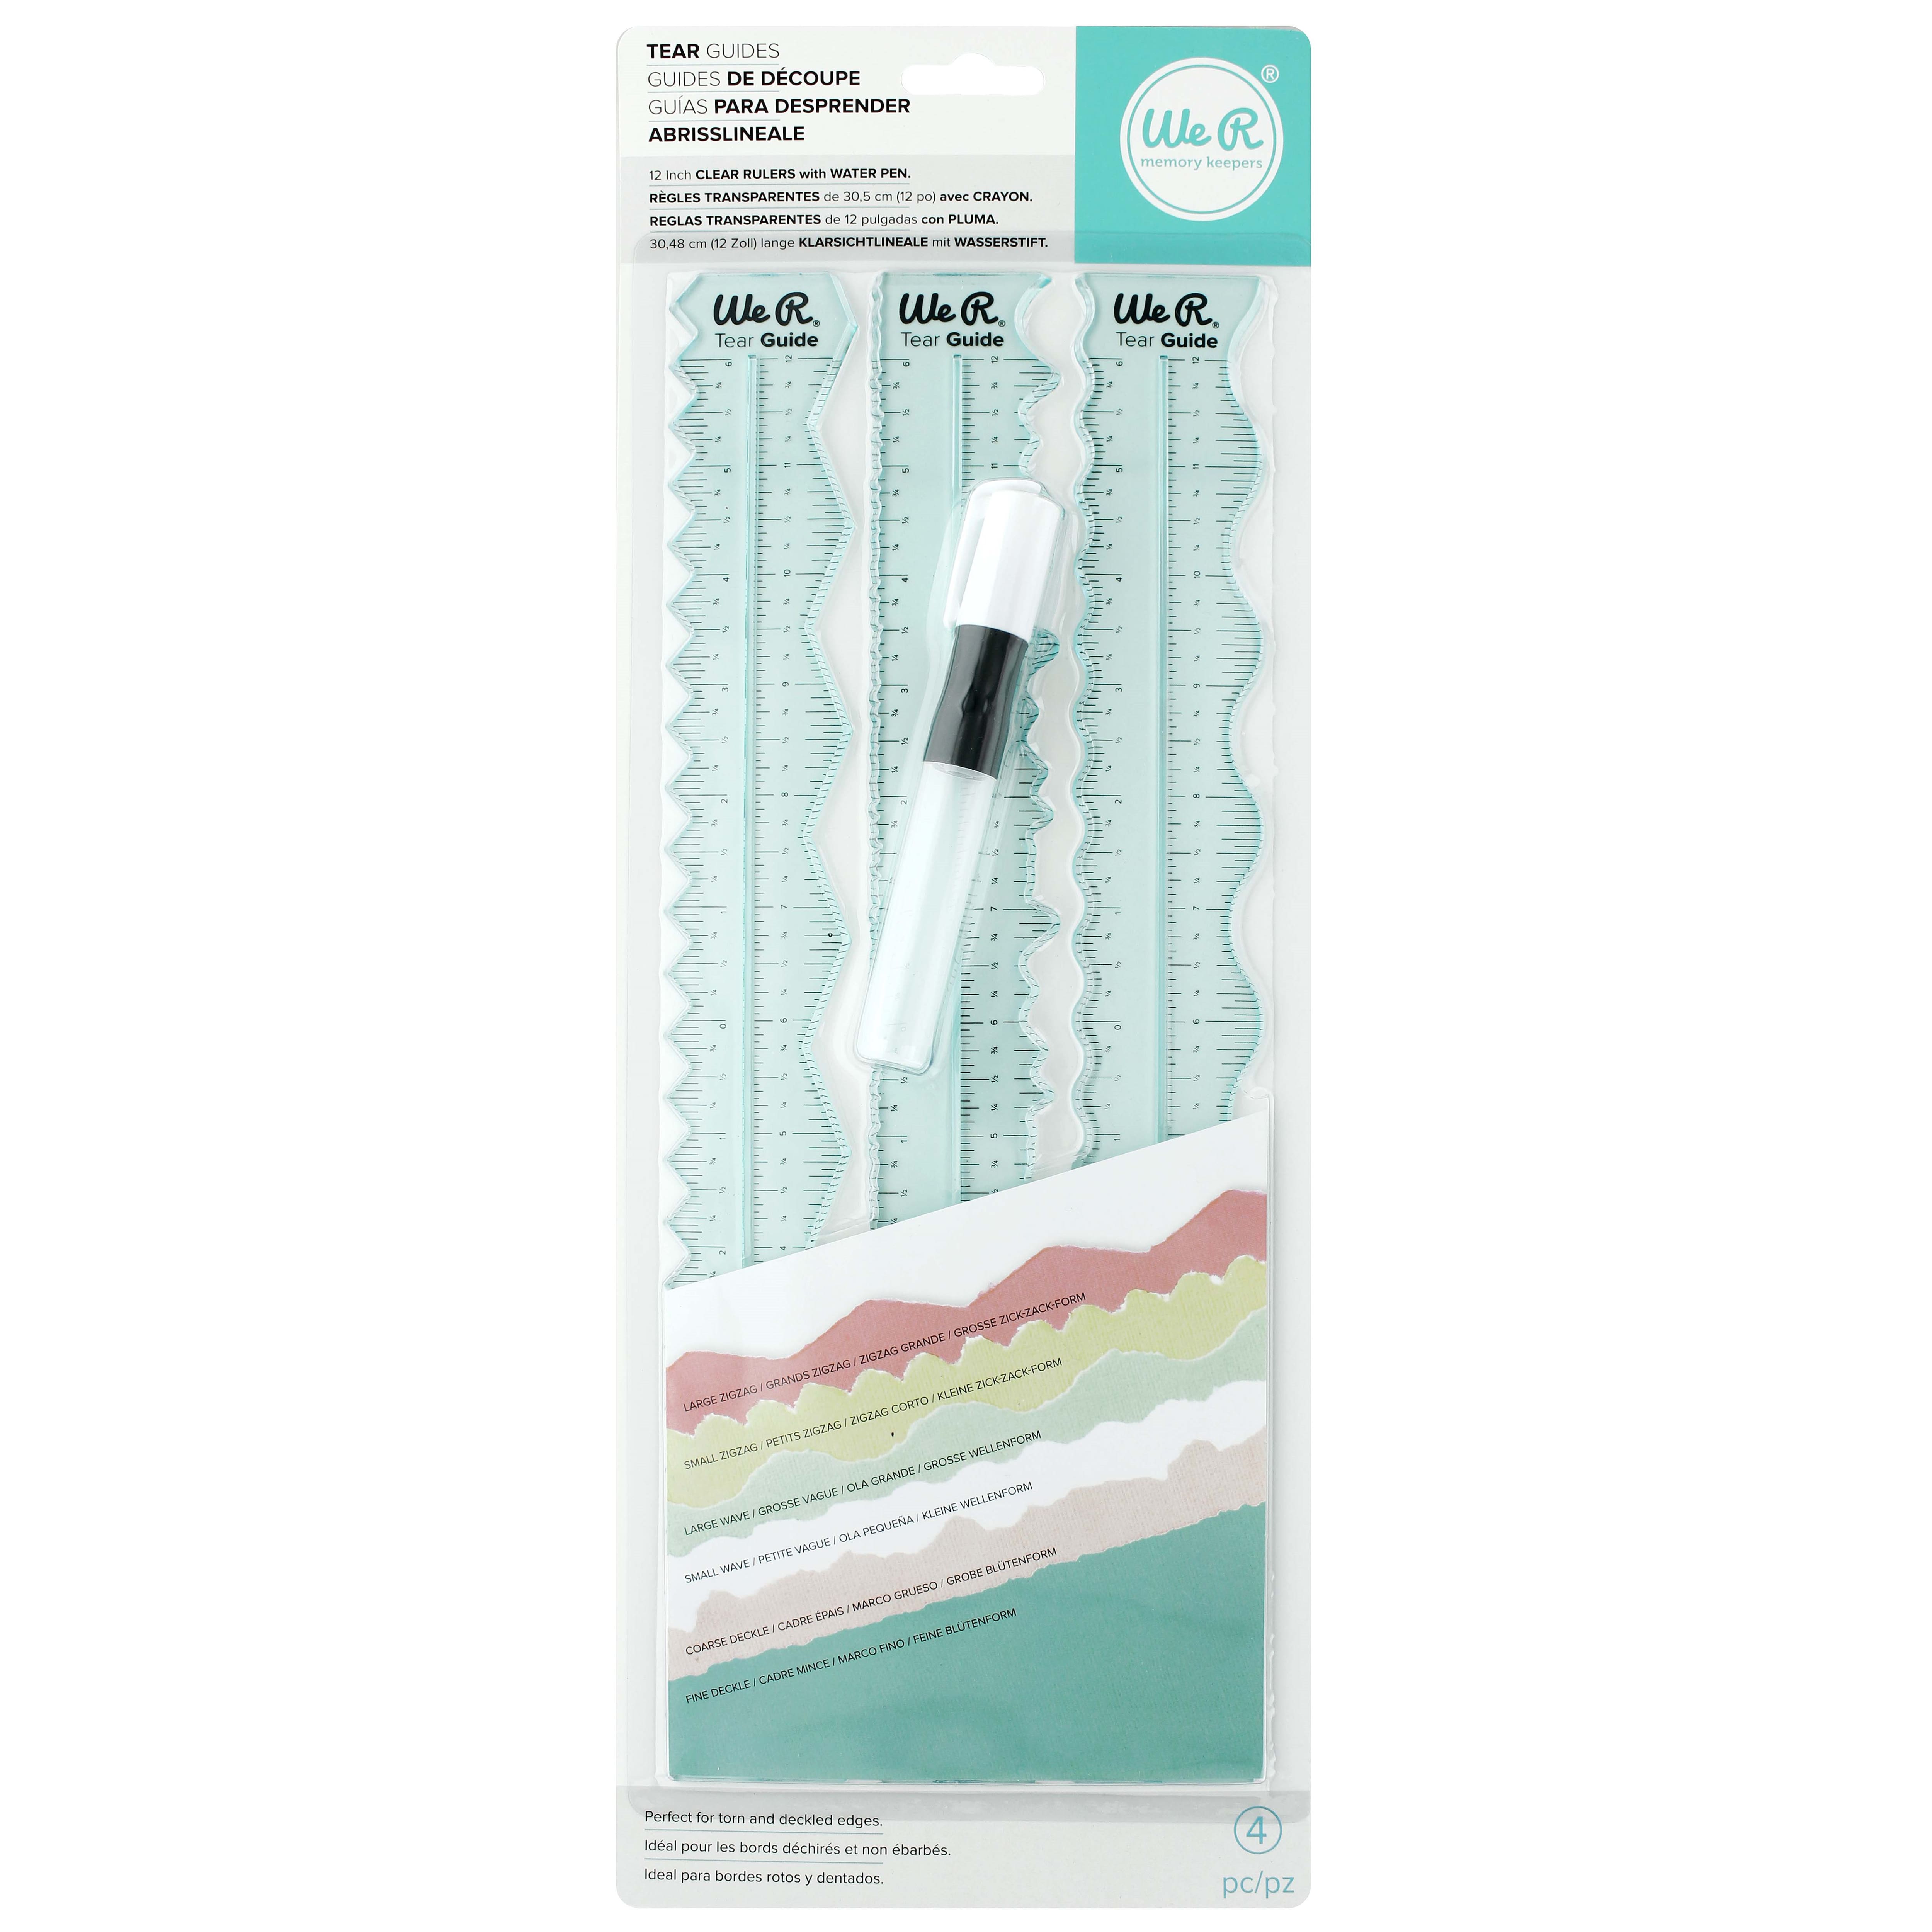 Artway Professional Deckle Edge Ripper Ruler with Protective Case - 50cm